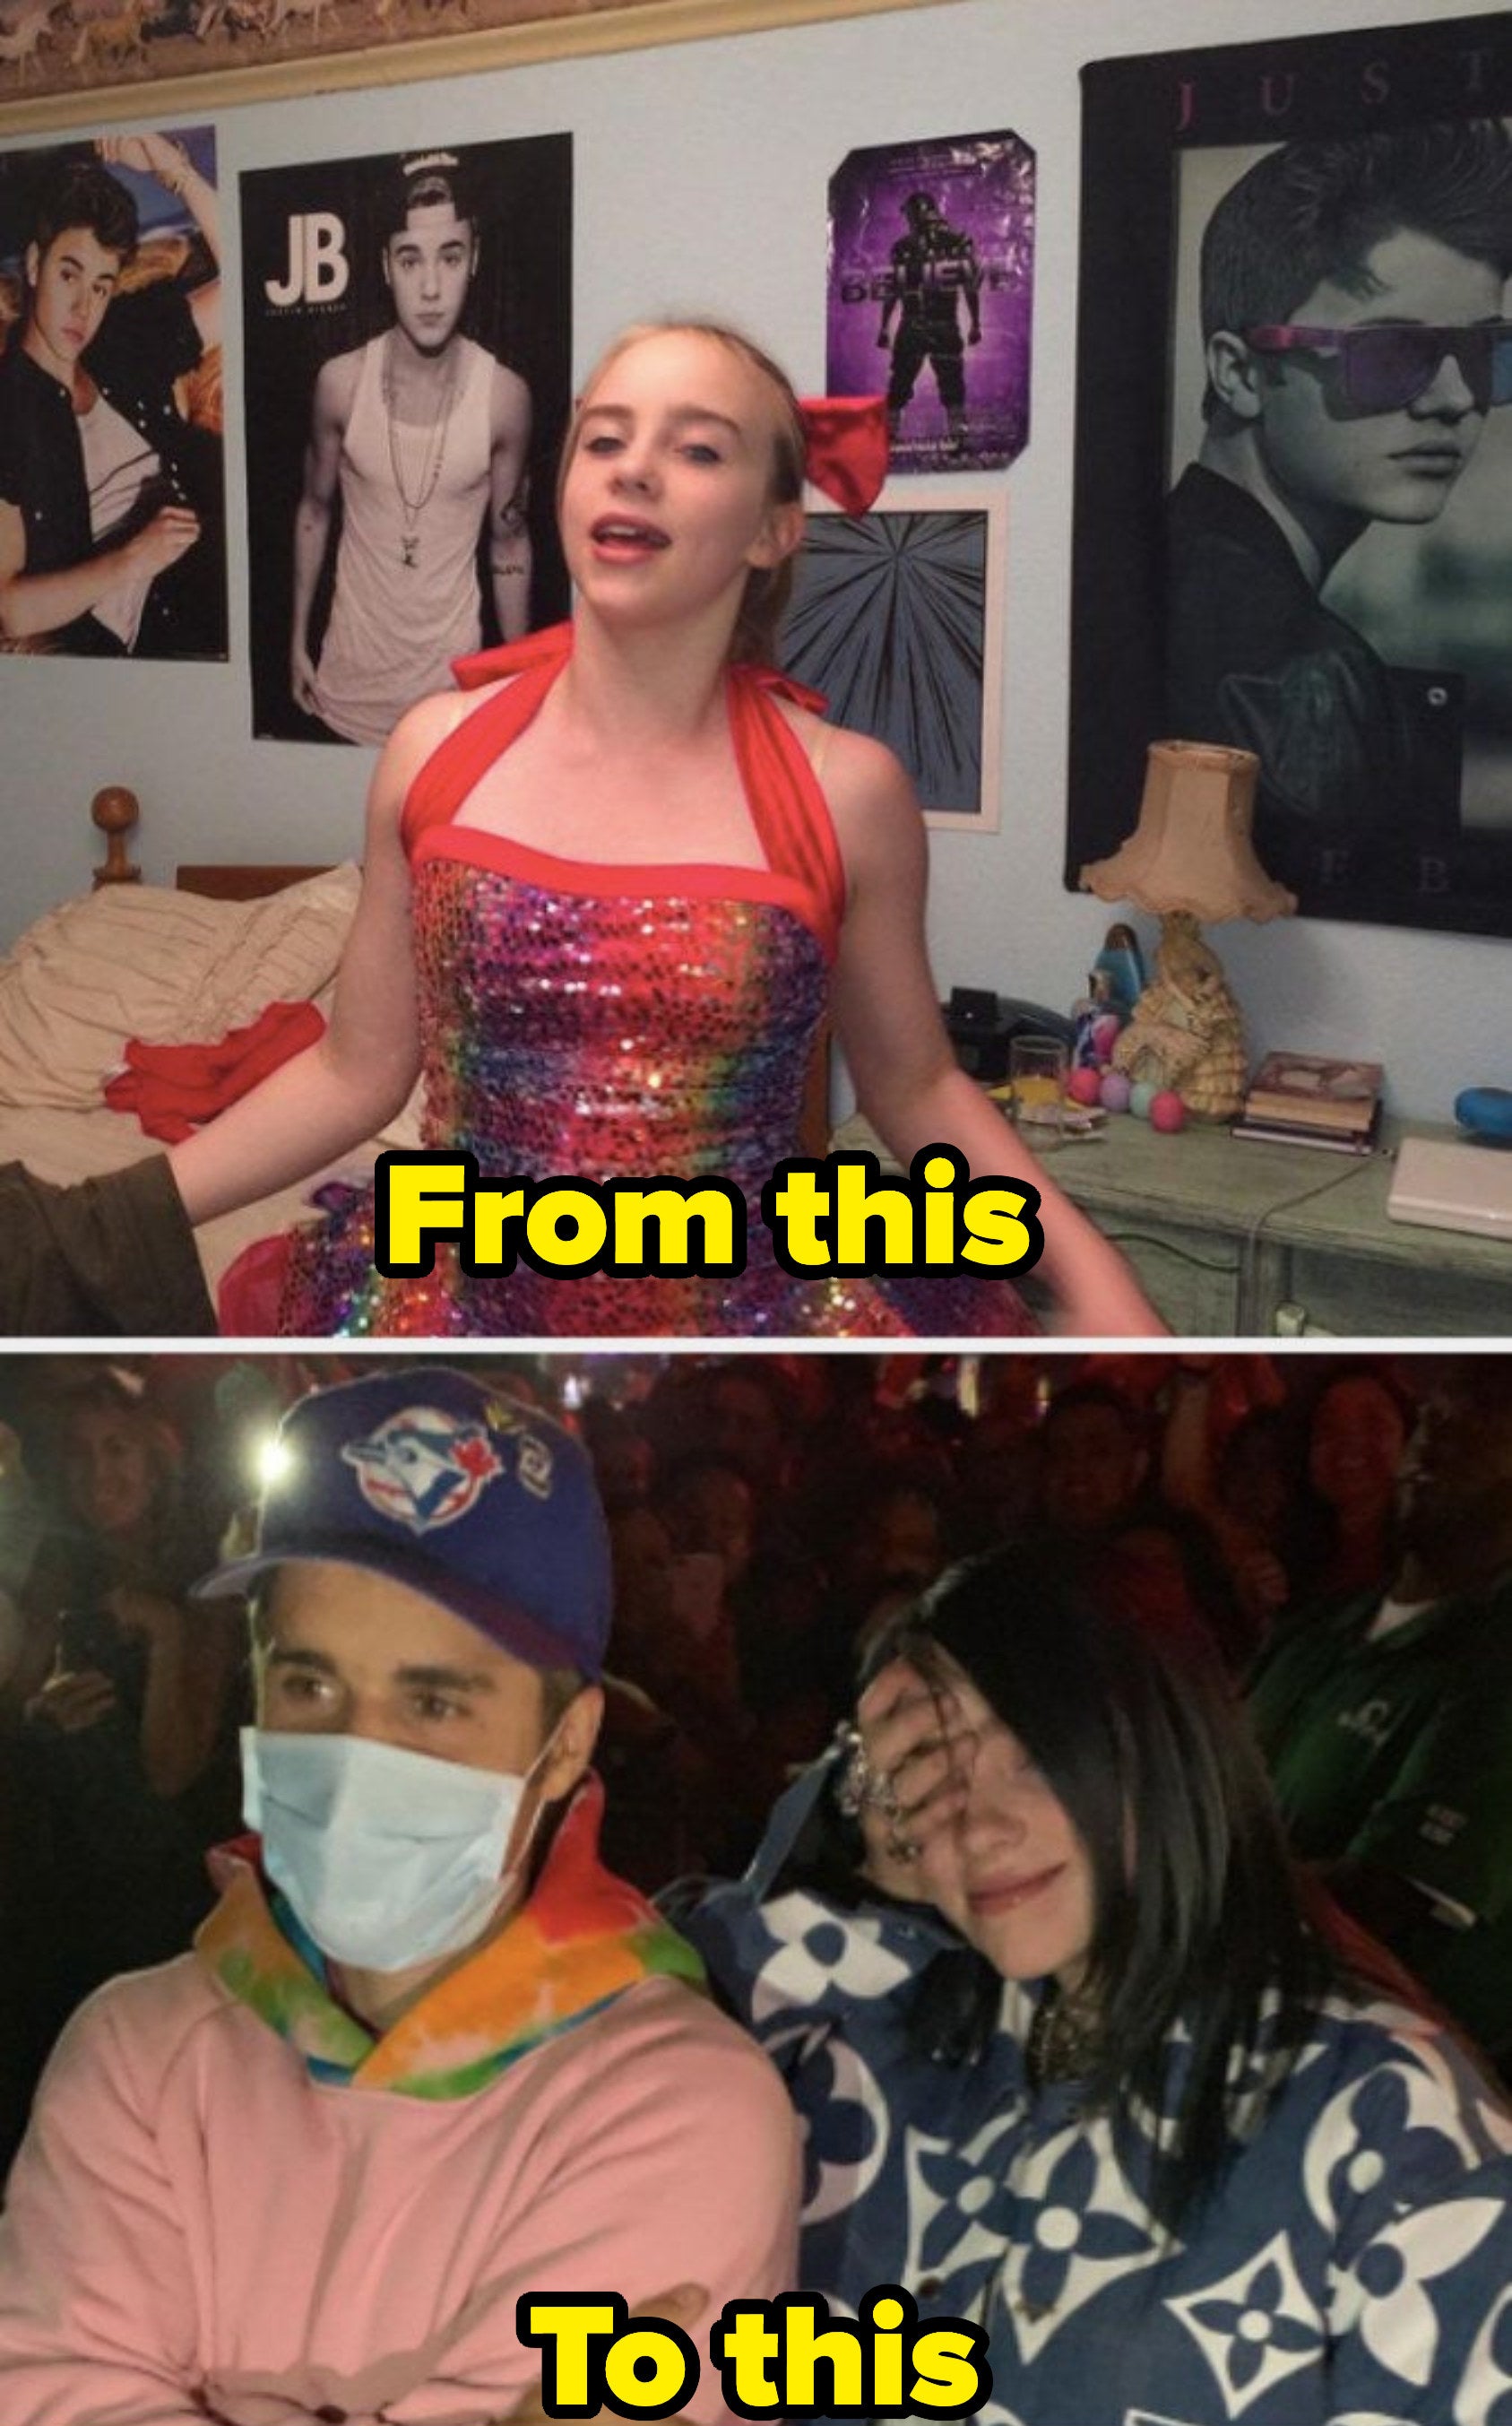 A photo of young Billie Eilish with Justin Bieber posters on her wall and a photo of her and Justin meeting in person at the 2019 Coachella music festival 